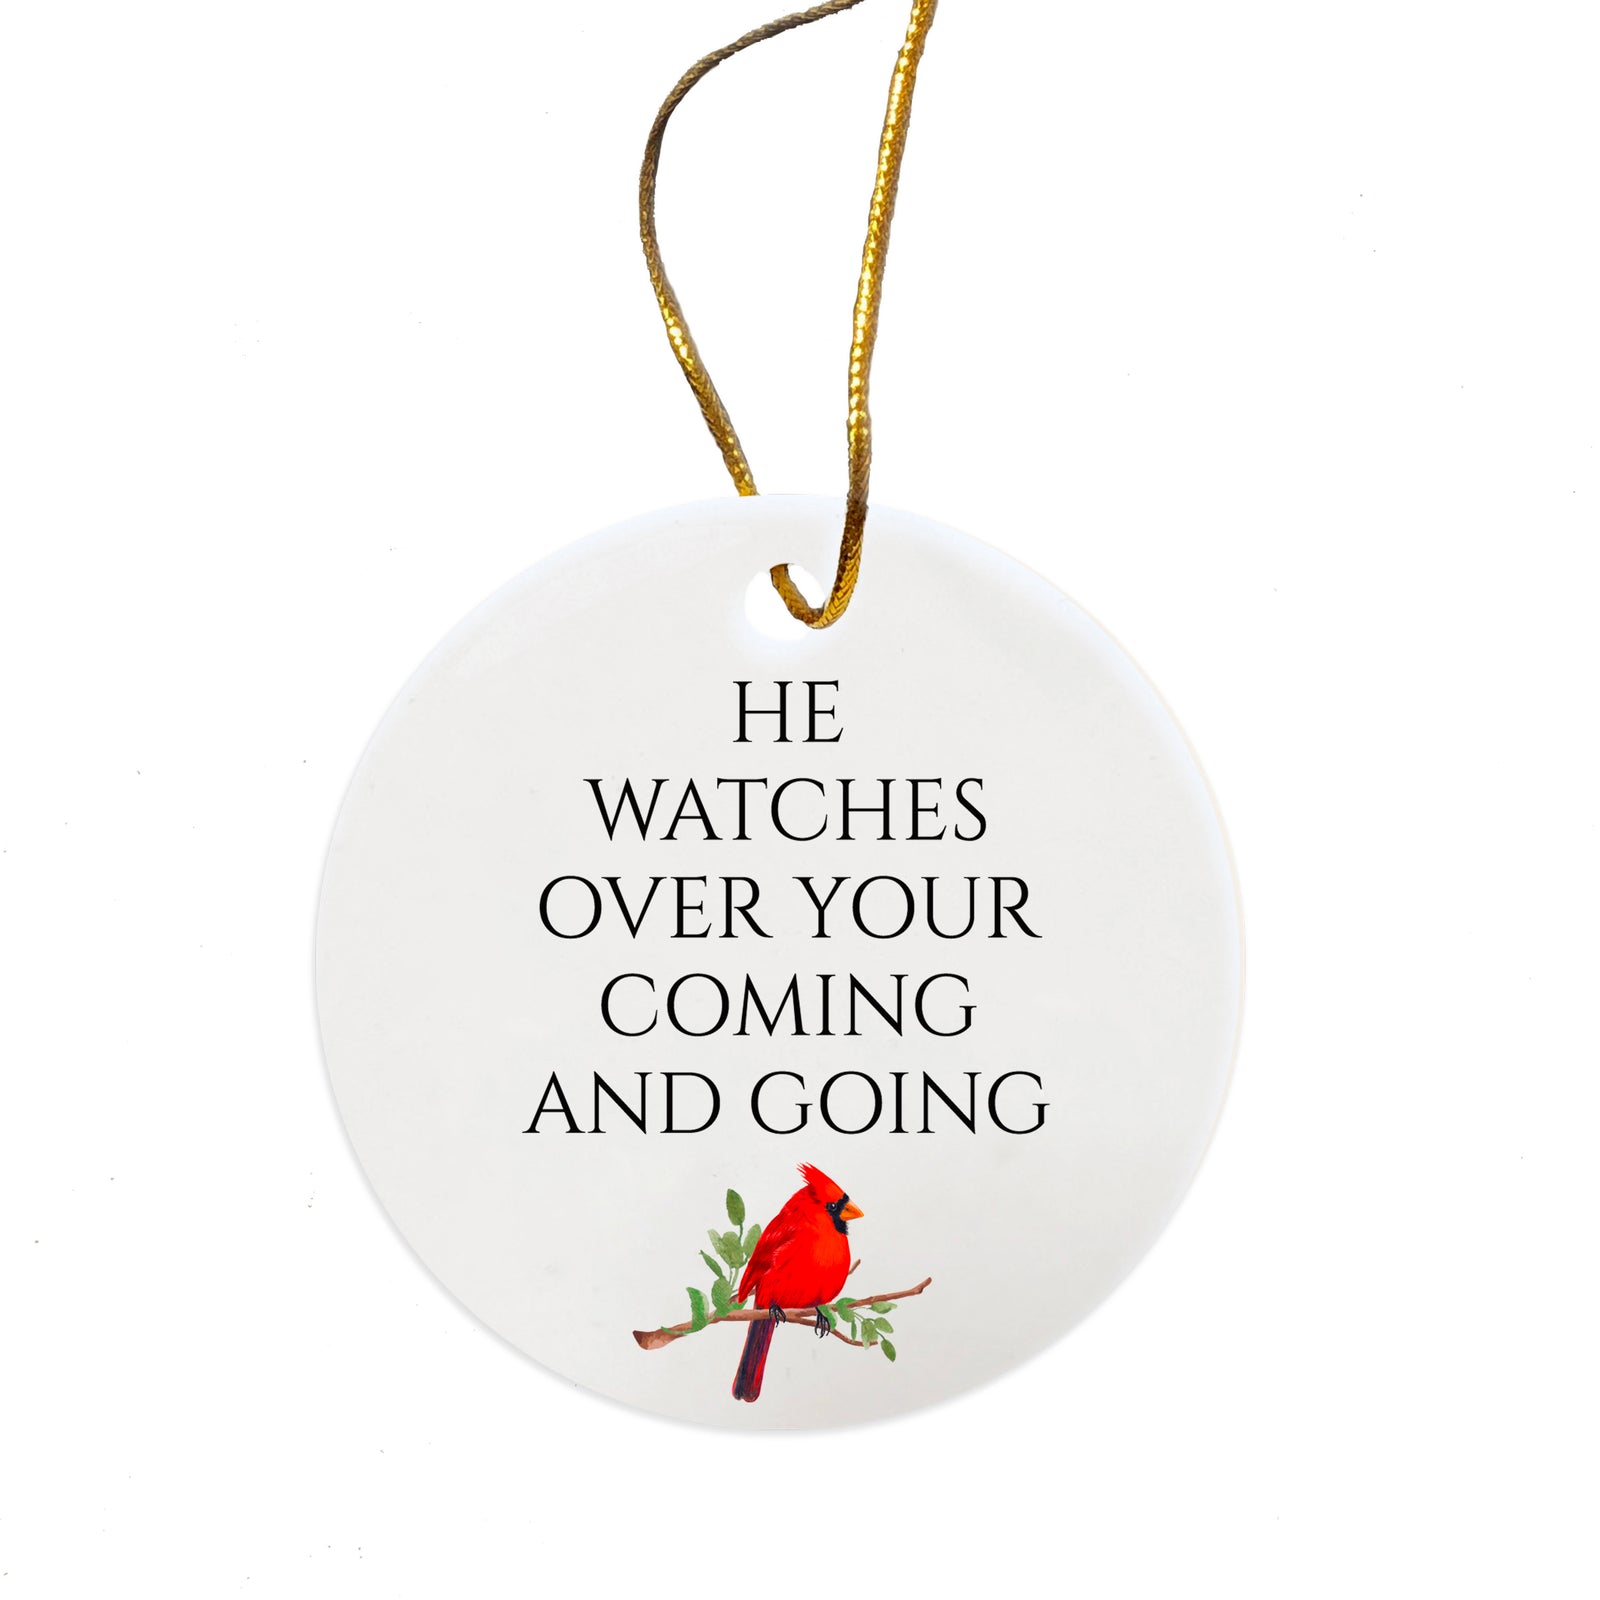 White Ceramic Cardinal Ornament With Everyday Verses Gift Ideas - He Watches Over